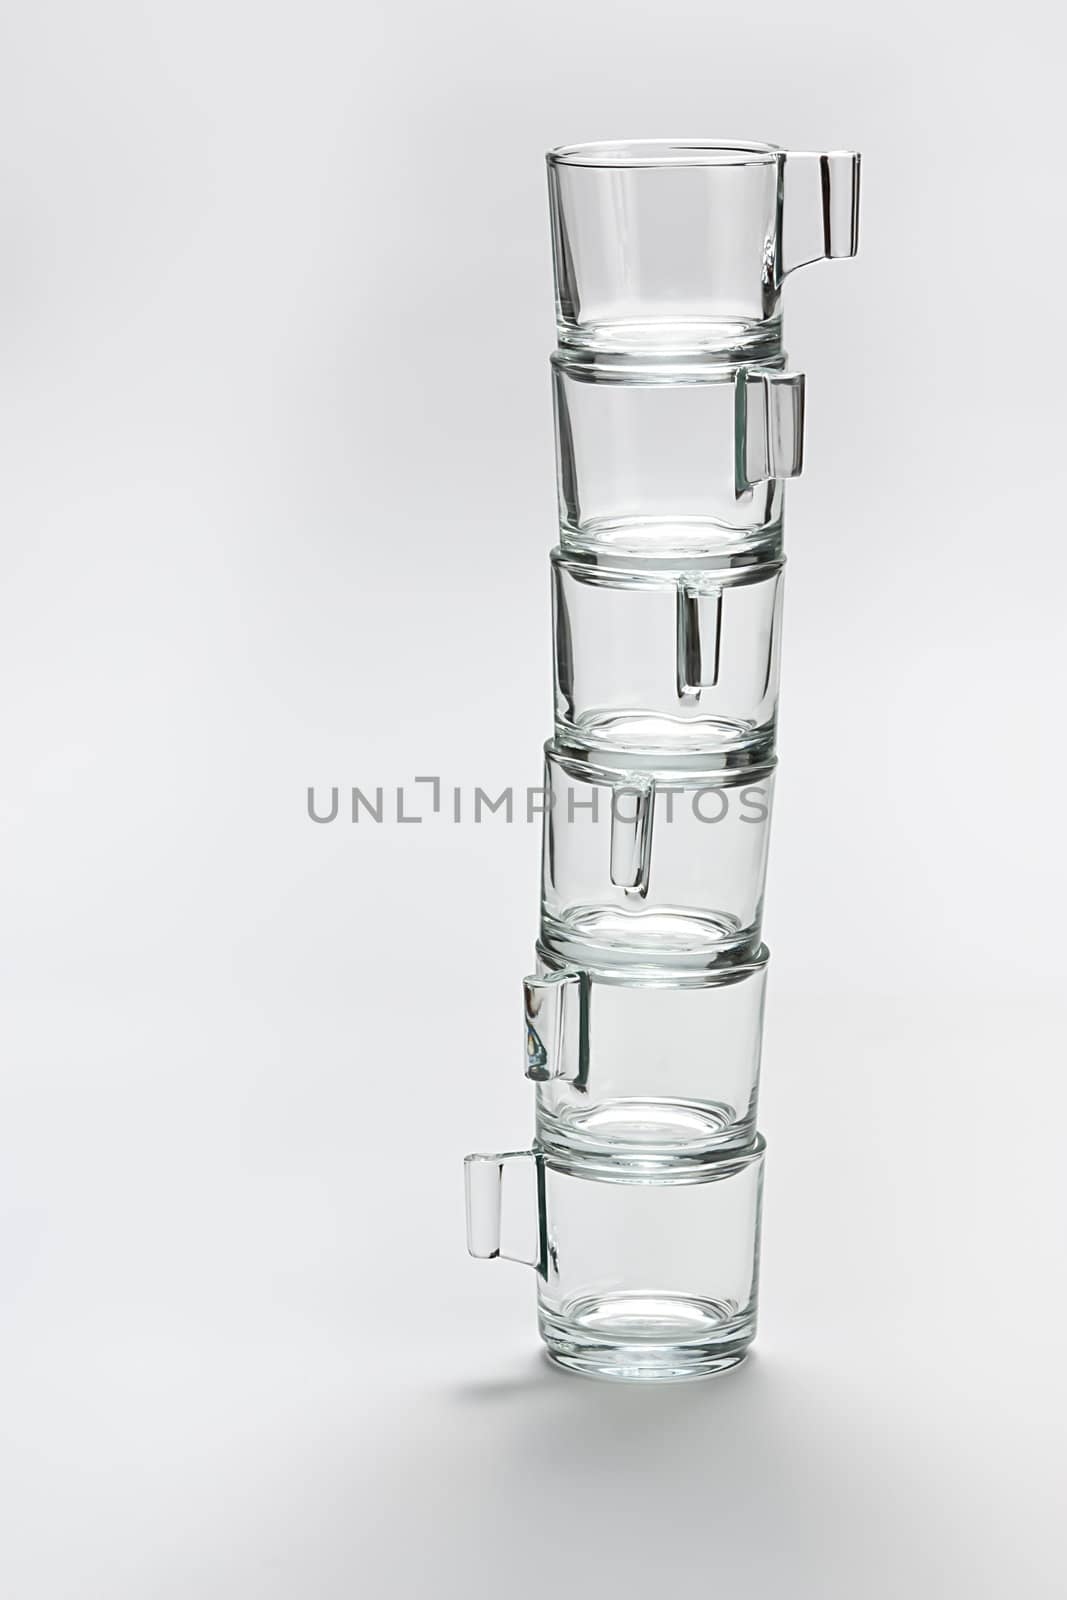 Perfect, clean, water glass against a white background